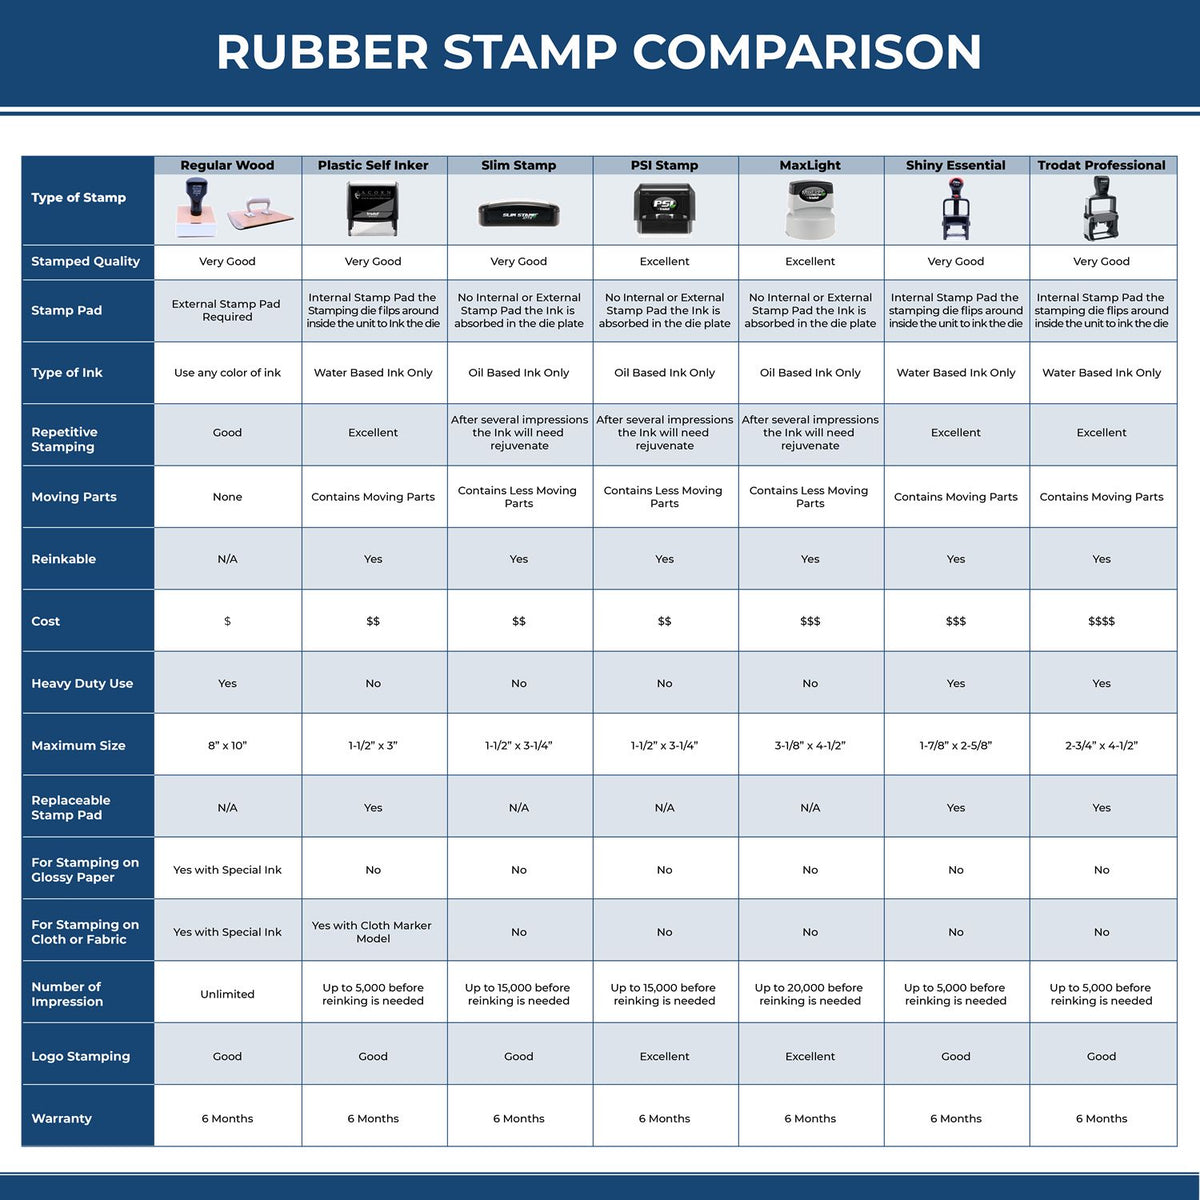 A comparison chart for the different types of mount models available for the Super Slim California Notary Public Stamp.